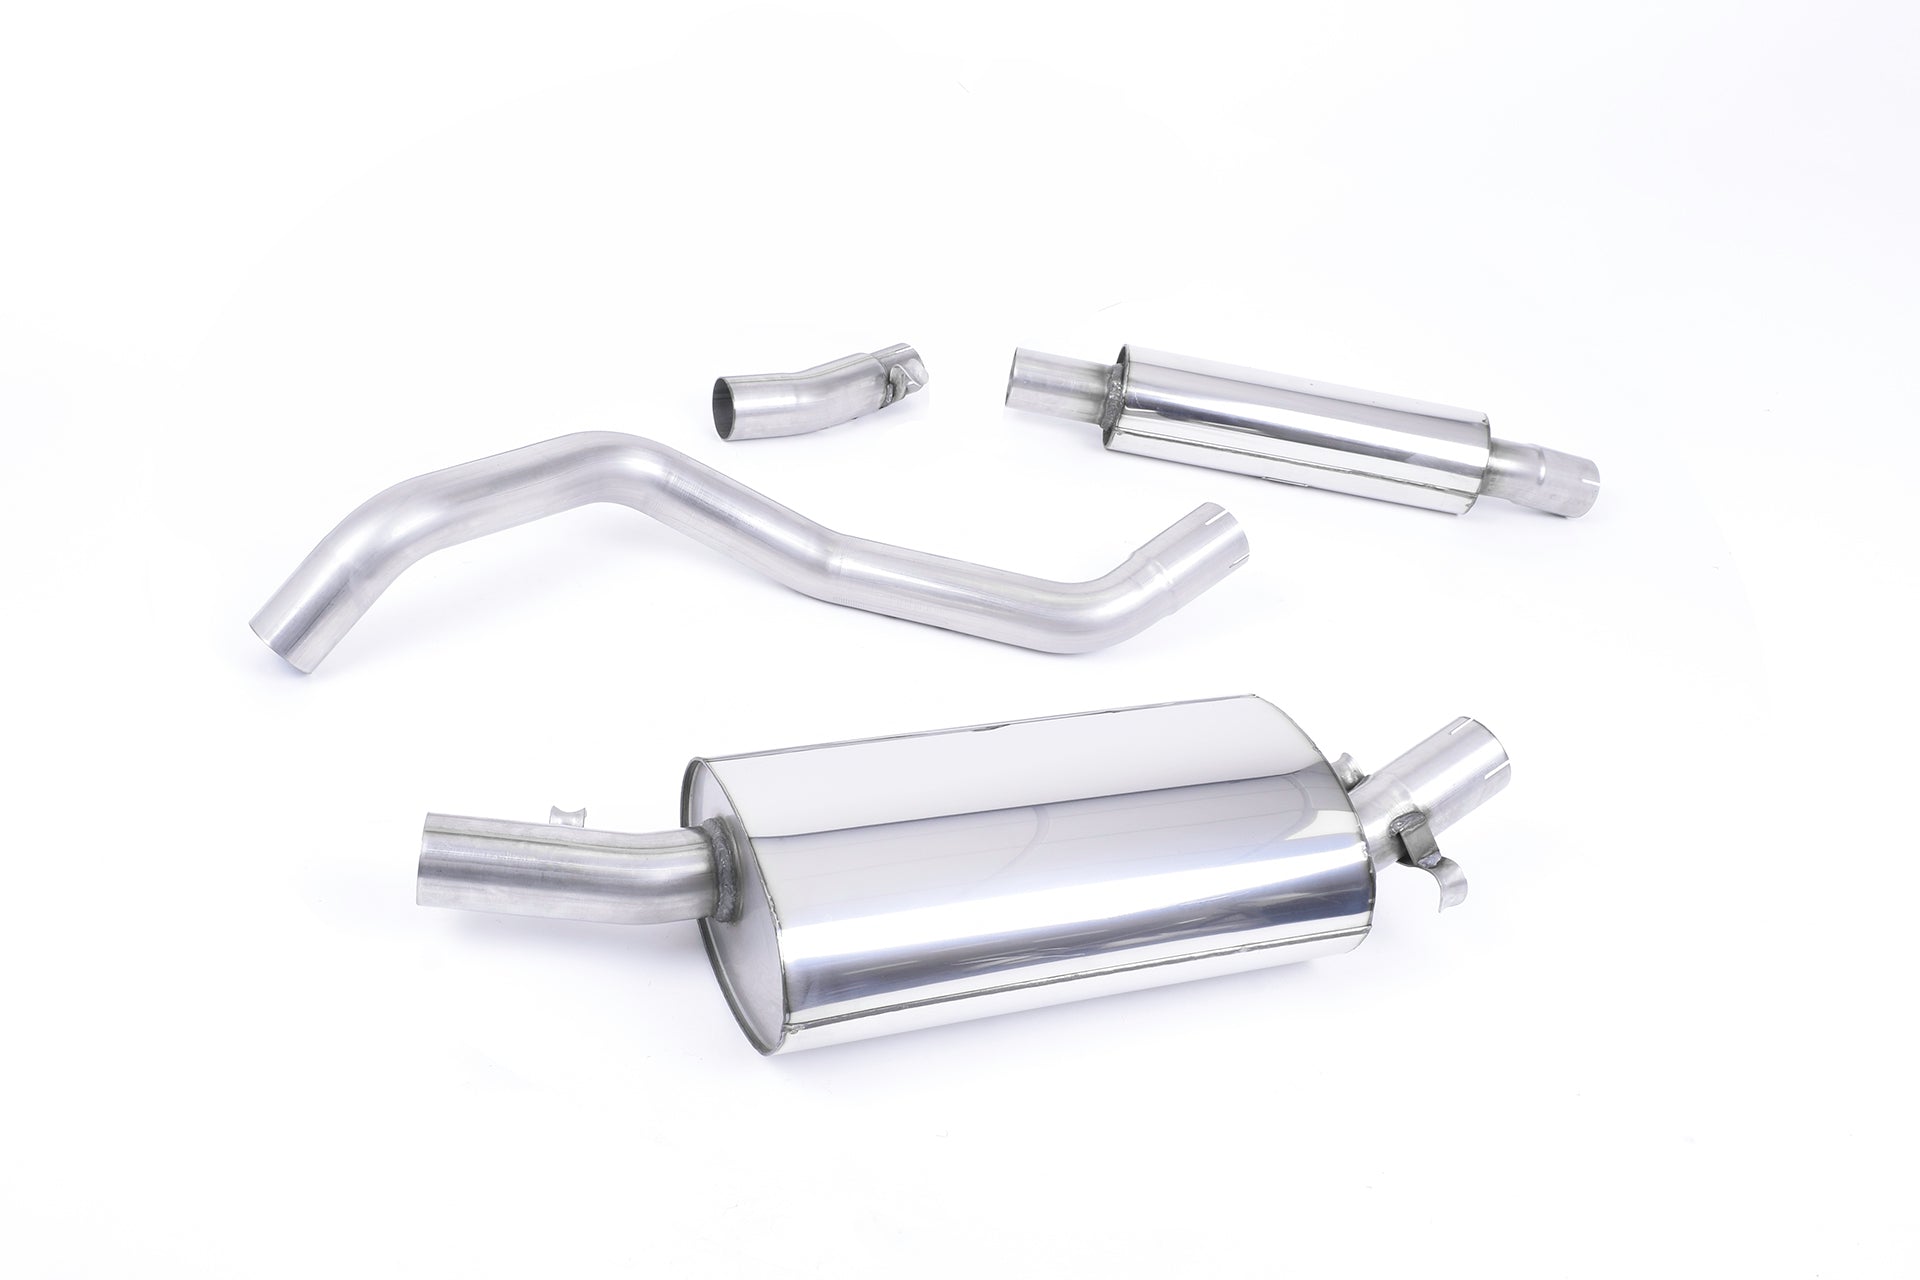 MillTek MCXVW207 Volkswagen Golf Downpipe-back Resonated (Quieter) for fitment to the OE Downpipe